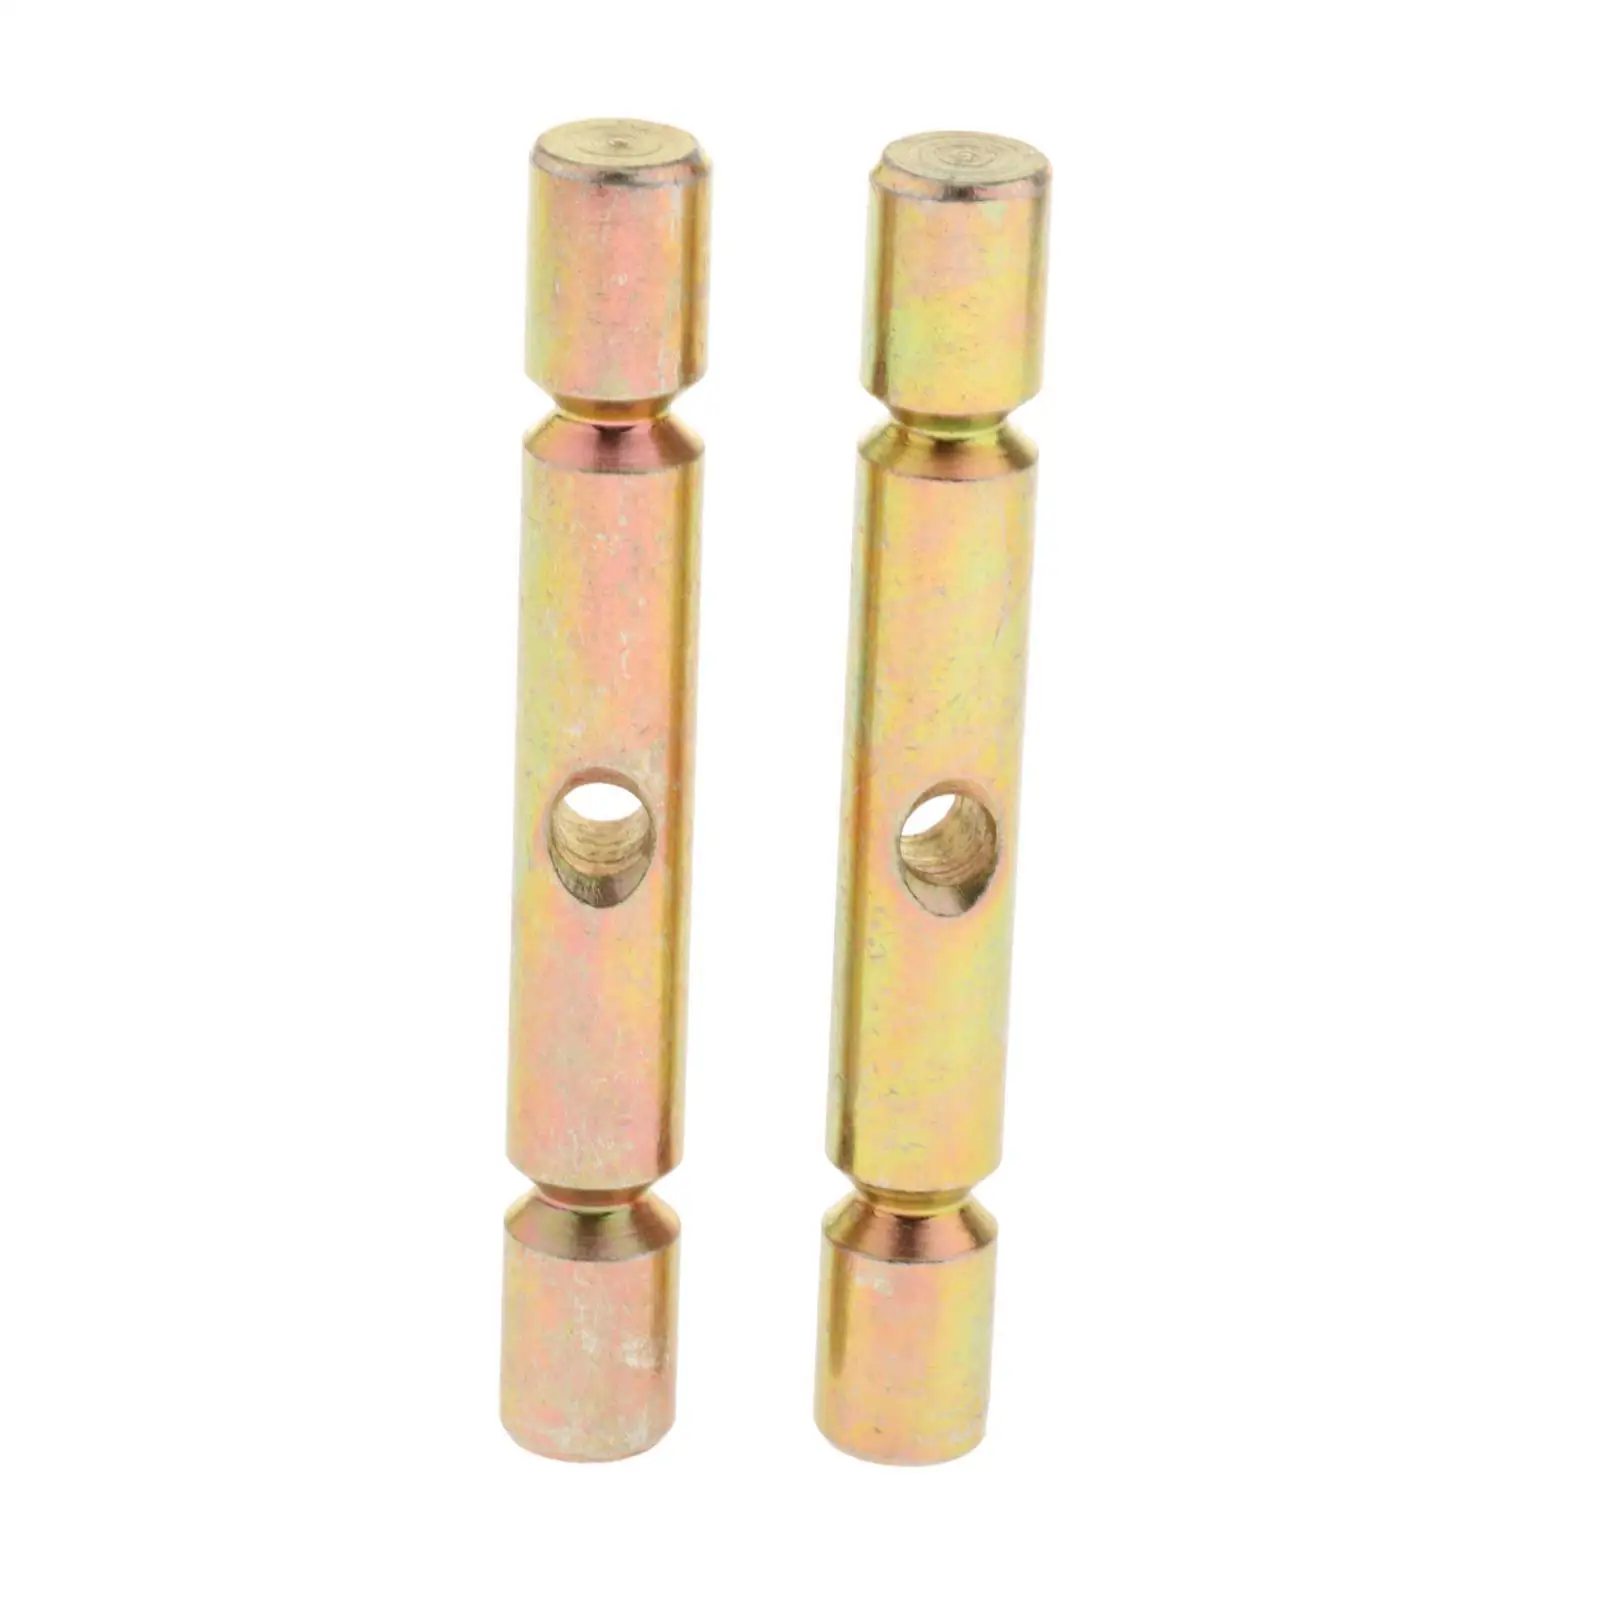 2 Pack Shear Pin fits for  2015 to 2019, Replace Part 05063, ,Durable Material